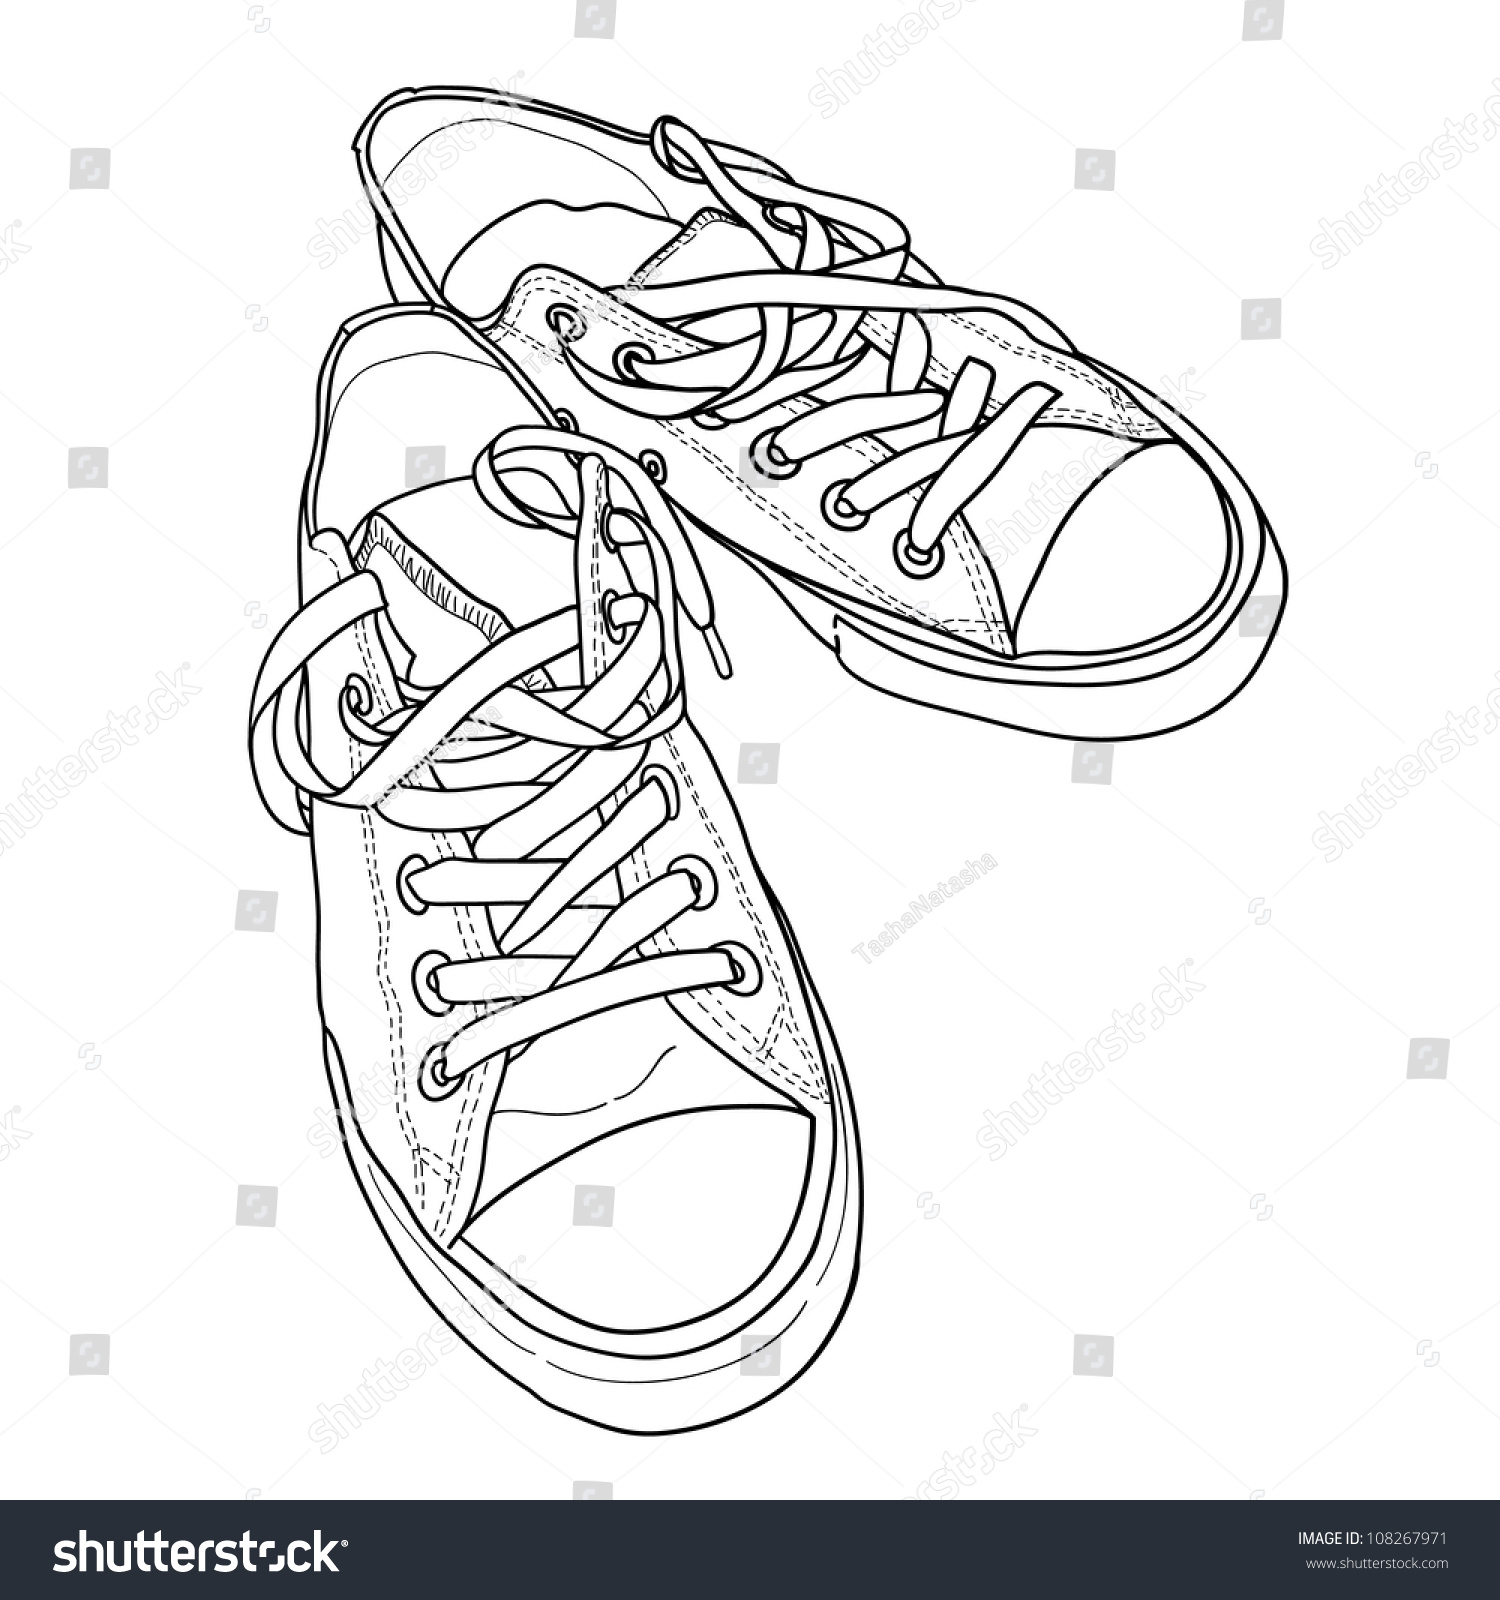 Pair Of Sneakers On The White Background Drawn In A Sketch Style ...